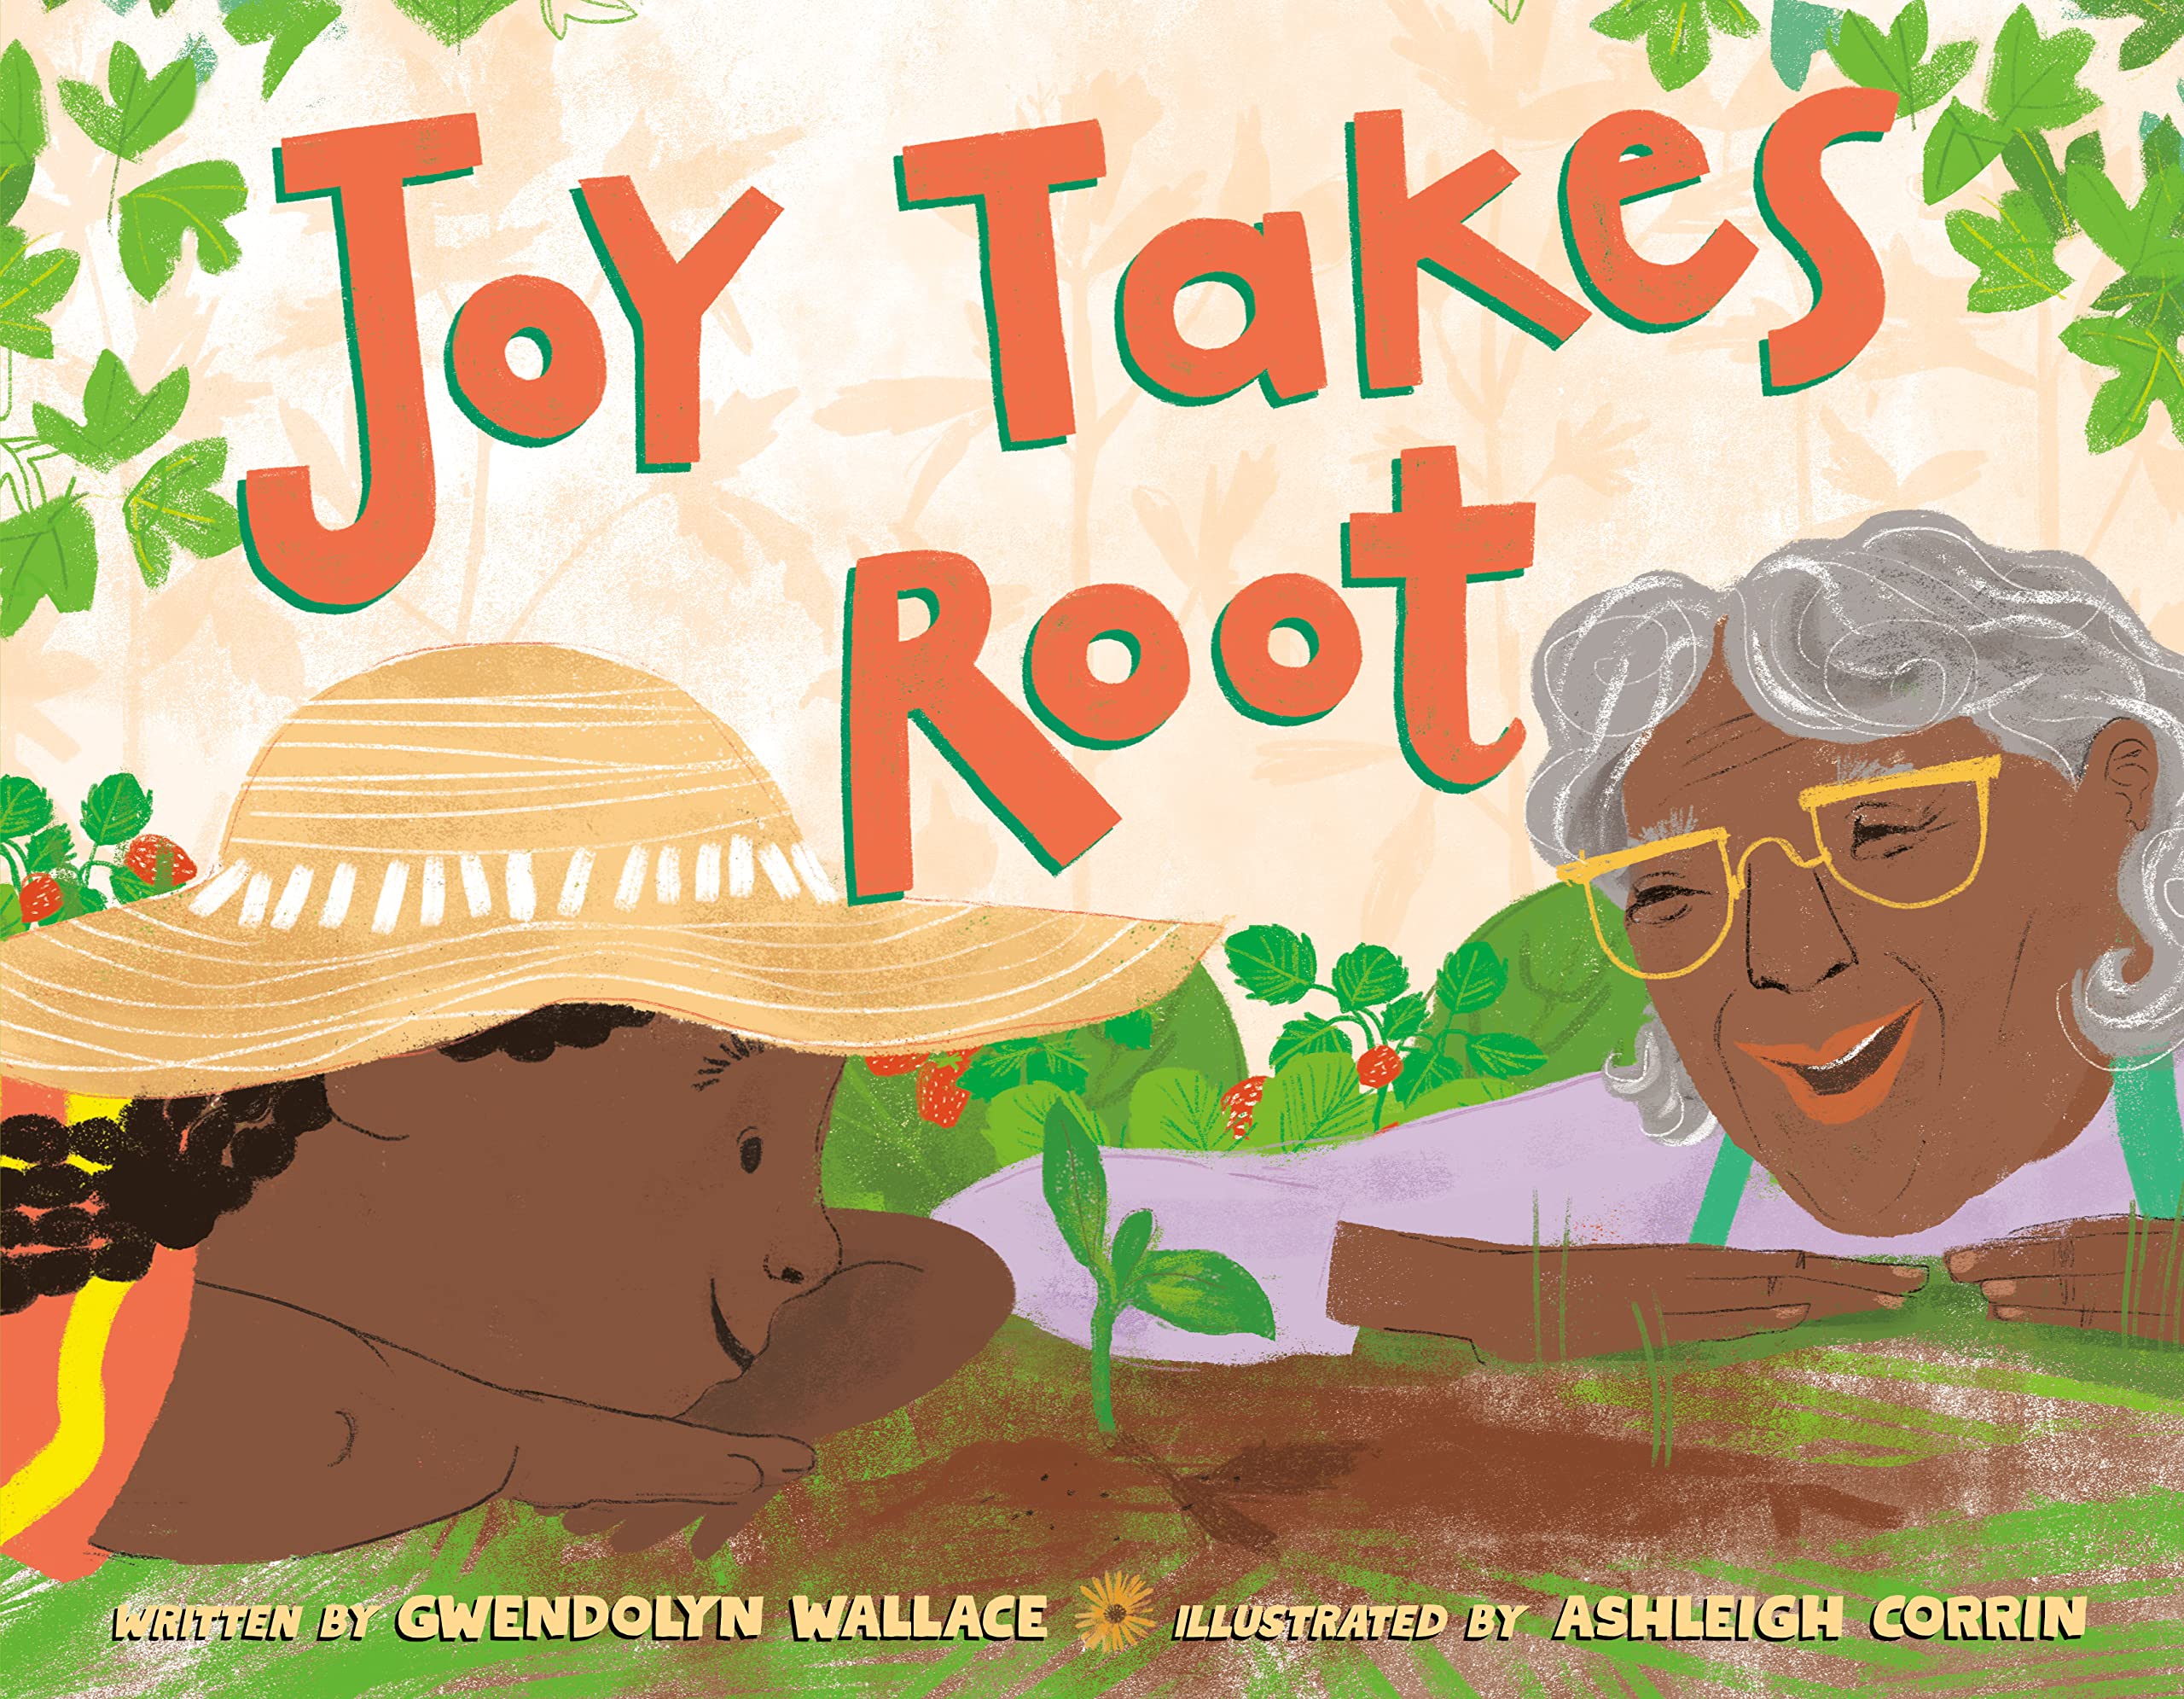 Joy takes root book cover.